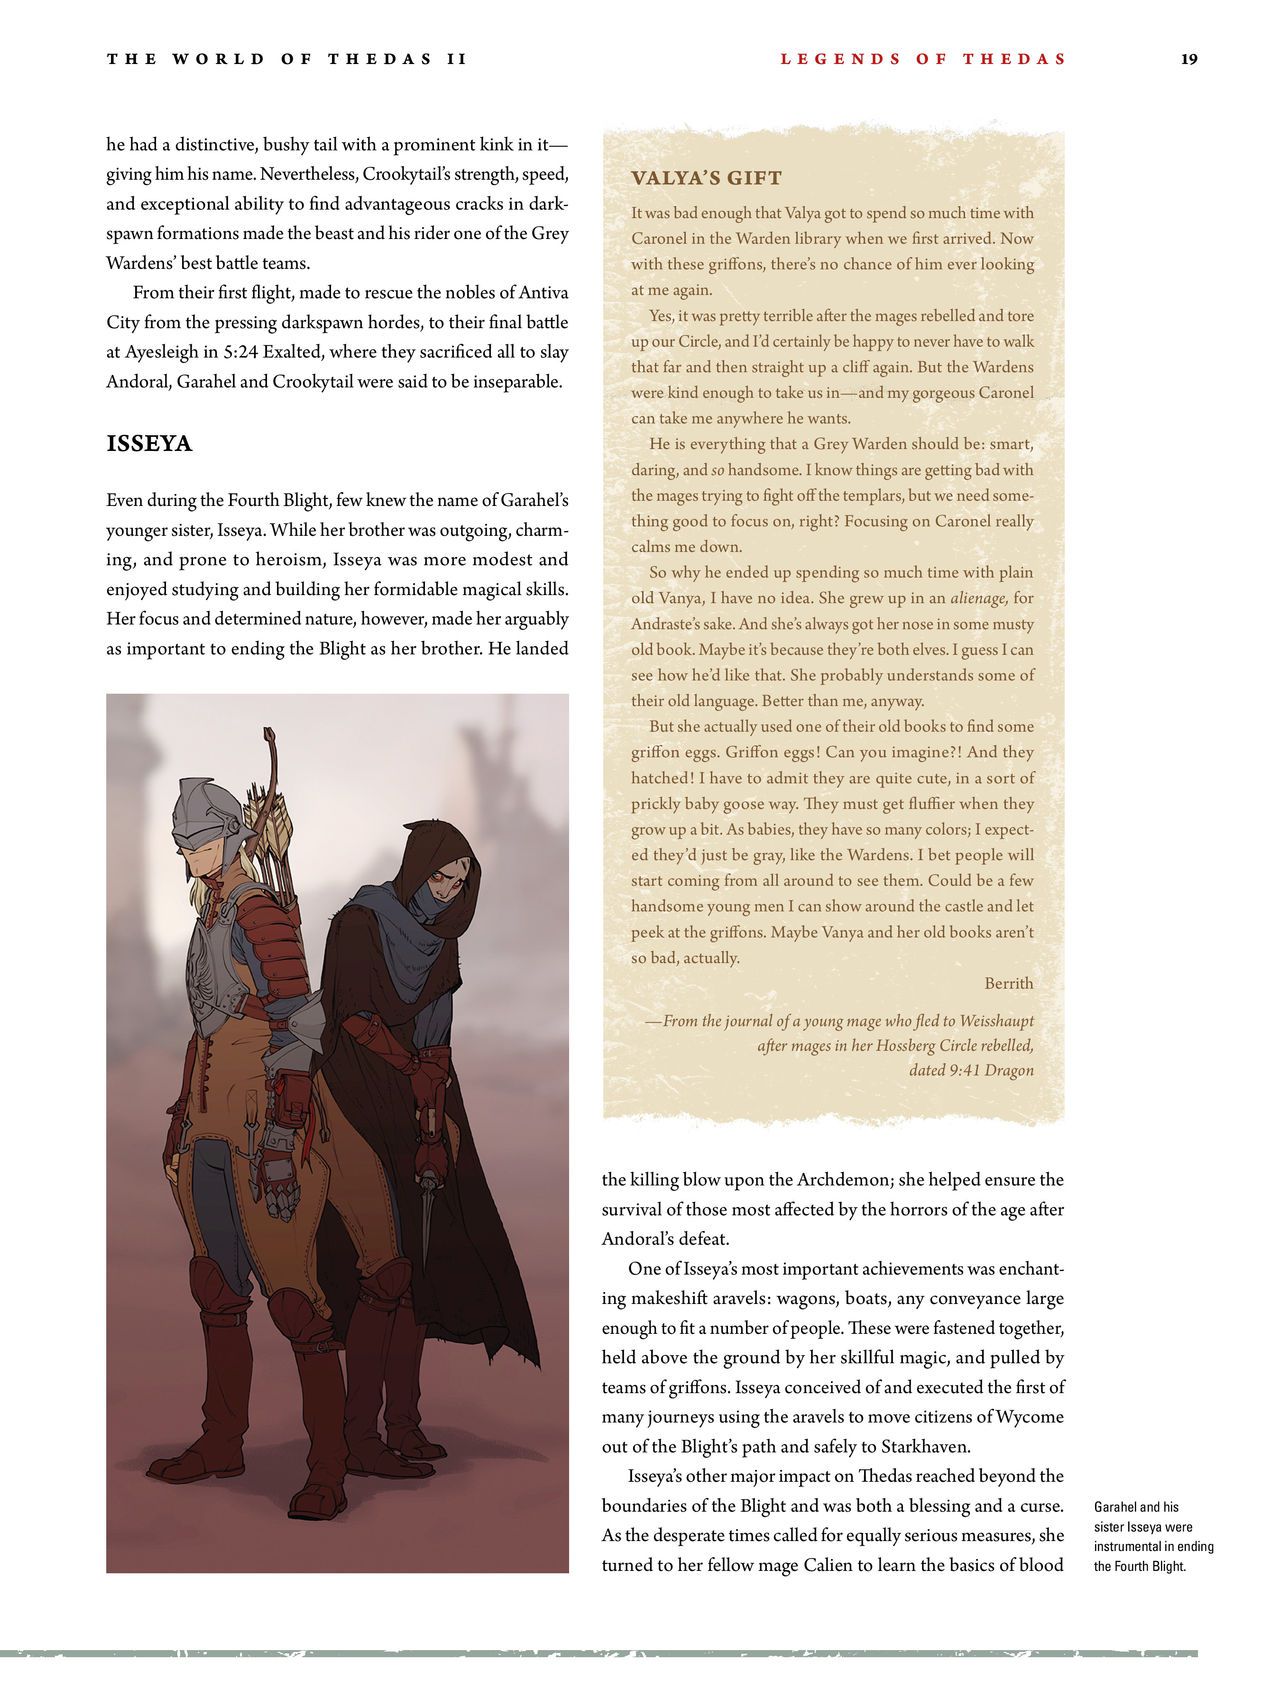 Dragon Age - The World of Thedas v02 17